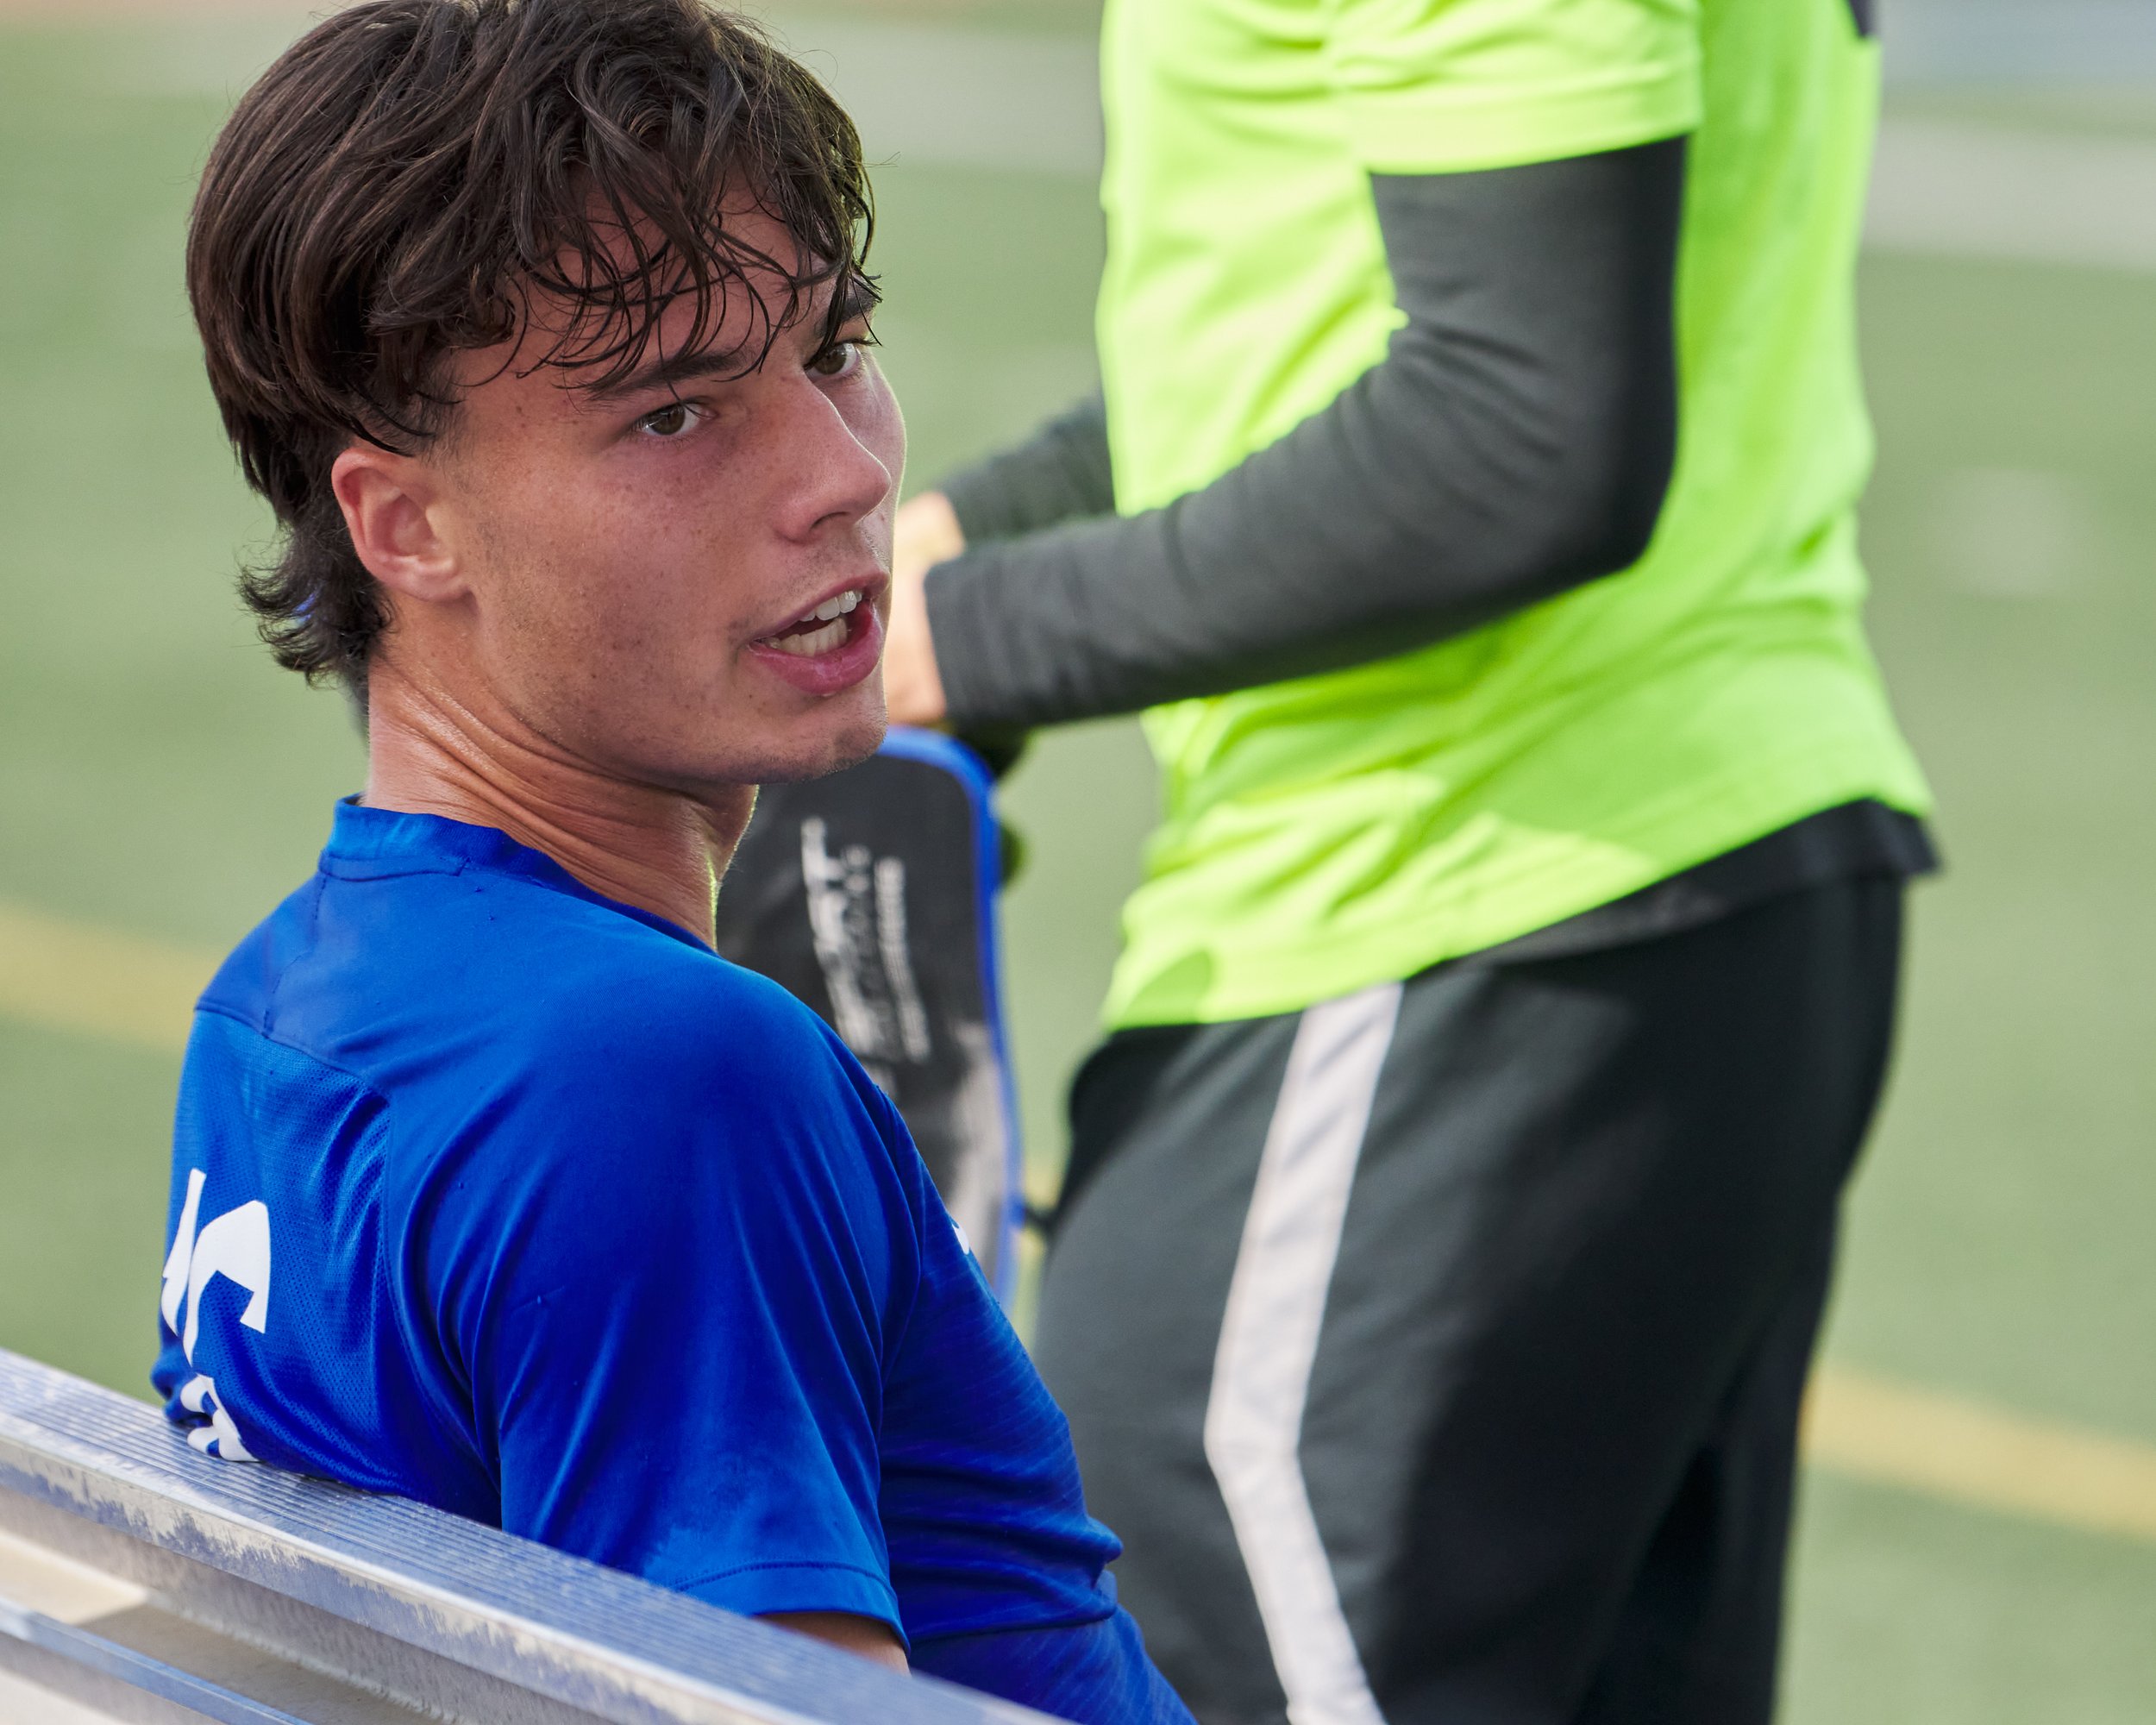  Santa Monica College Corsairs' Kyler Sorber tells his teammates to control their tempers during the men's soccer match against the Los Angeles Mission College Eagles on Tuesday, Nov. 1, 2022, at Corsair Field in Santa Monica, Calif. The Corsairs won